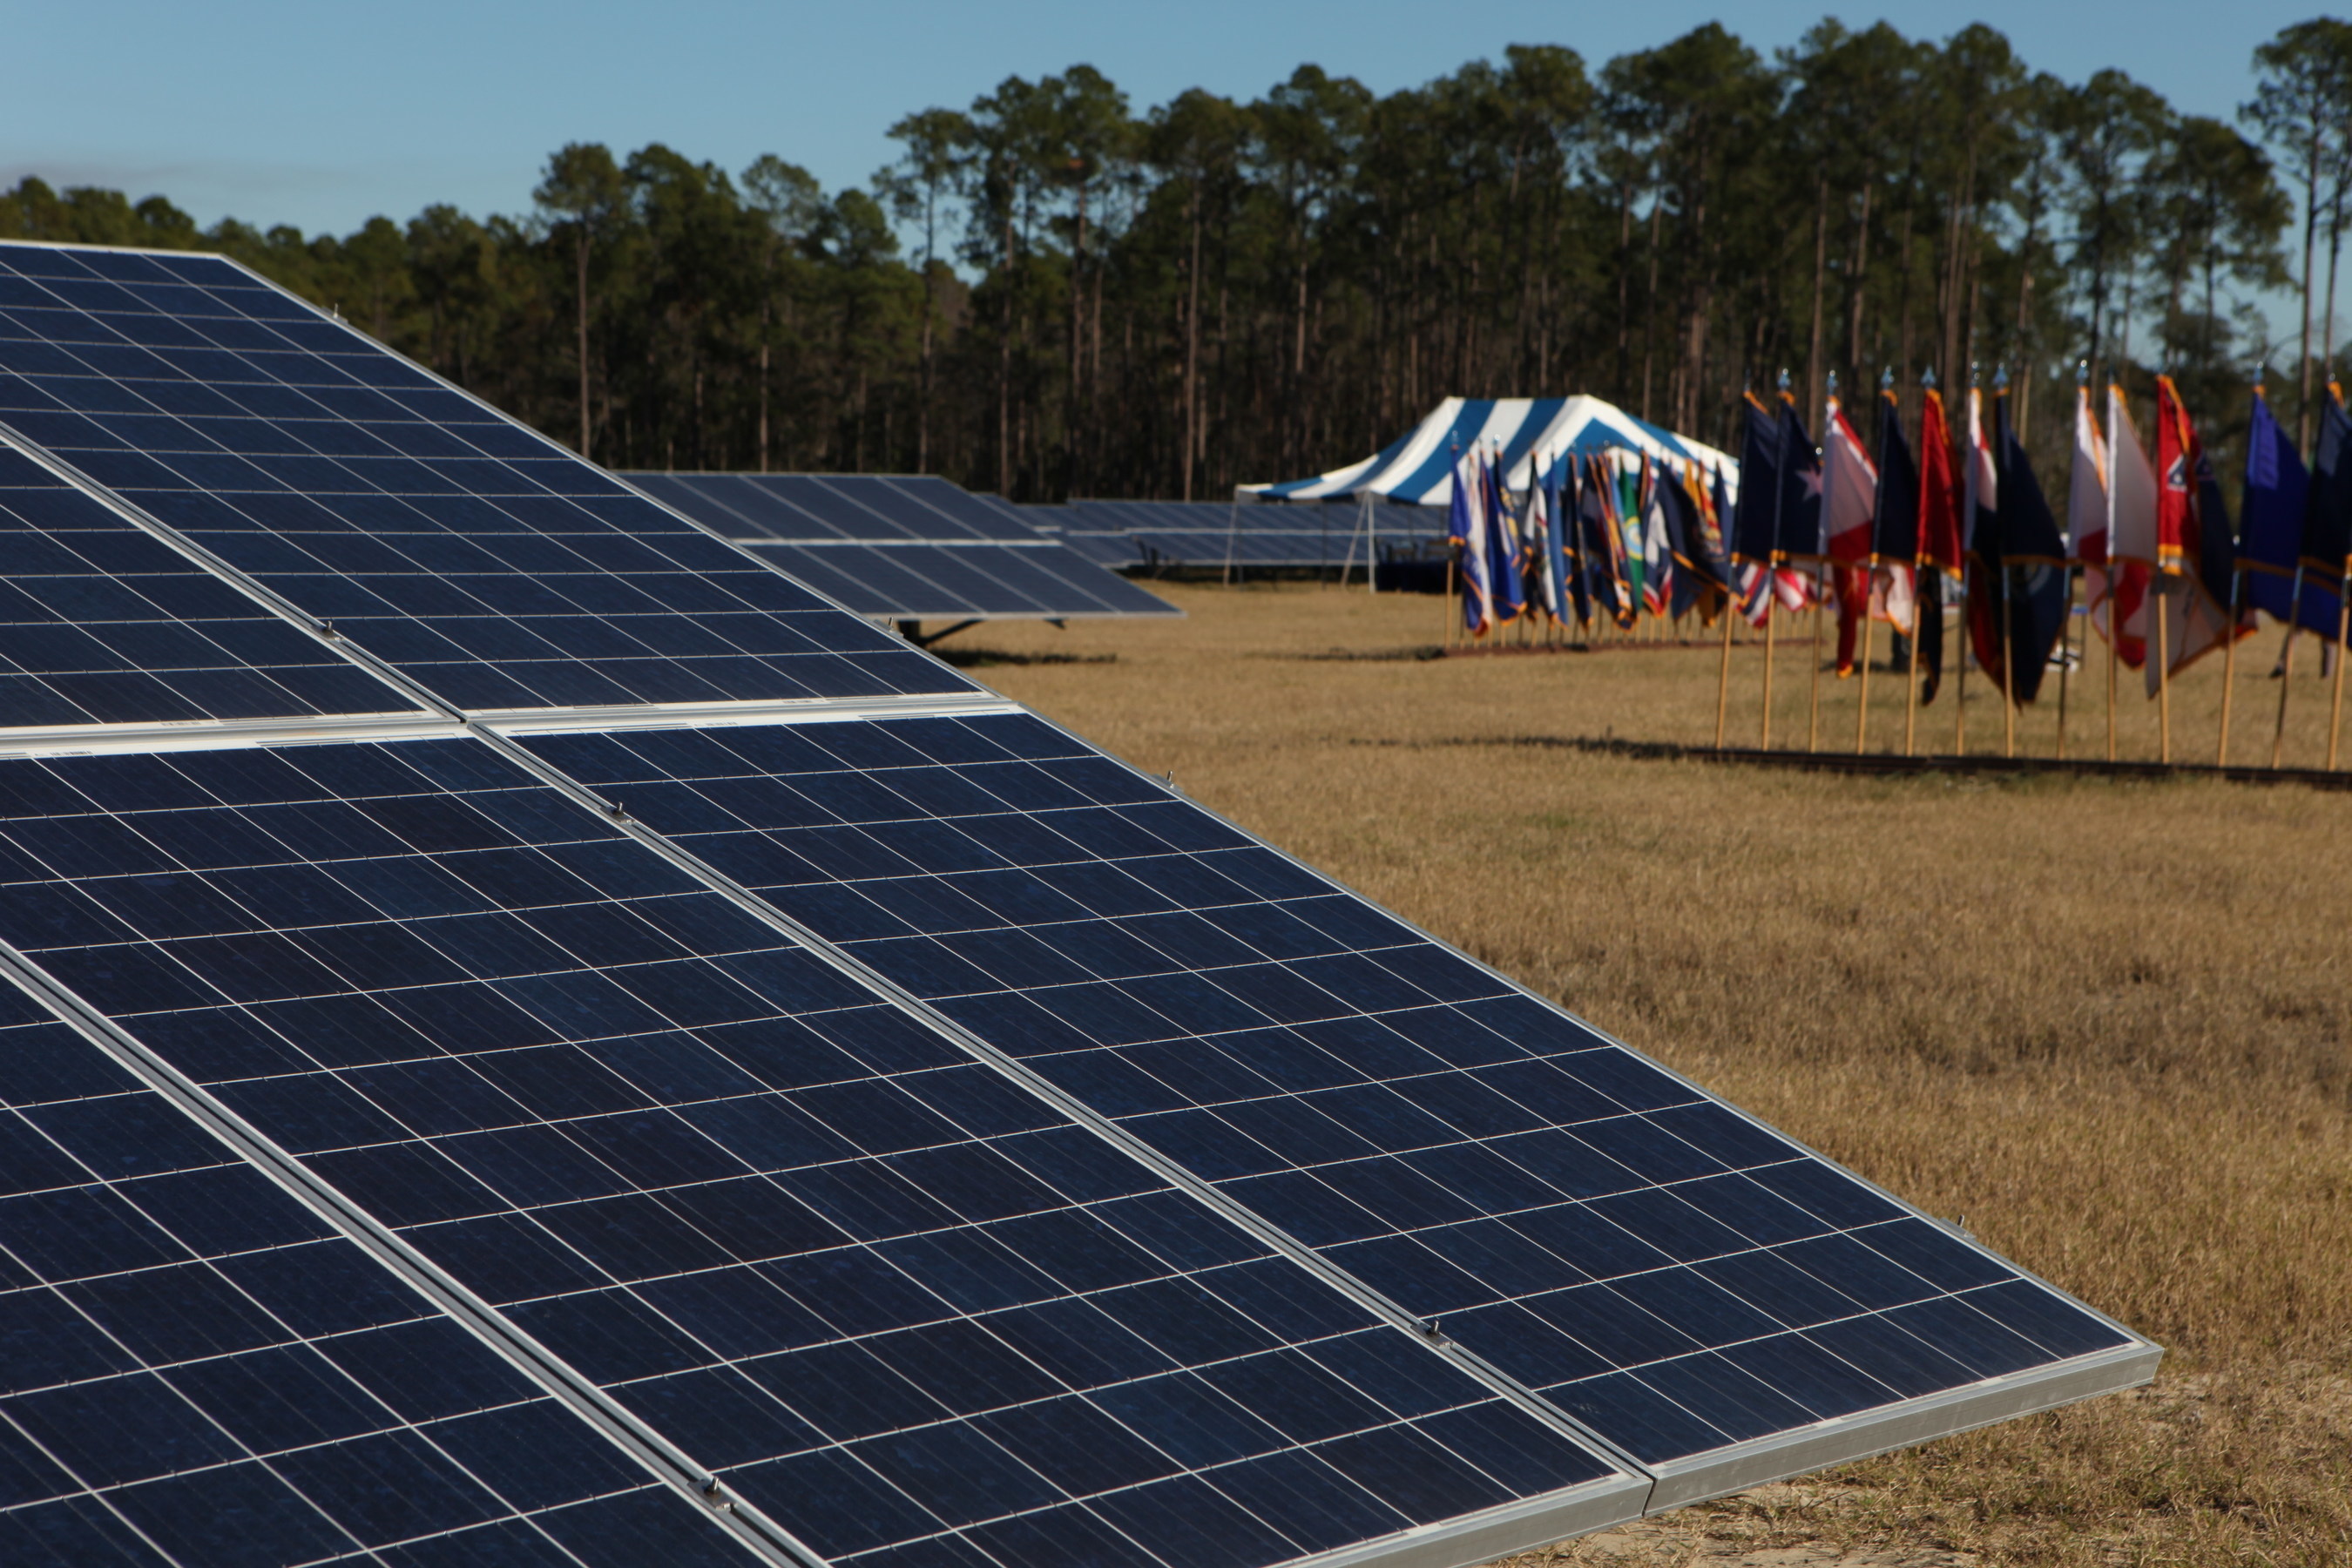 Including related transmission and distribution infrastructure, Georgia Power's solar project at Fort Stewart occupies 250 acres, utilizes approximately 139,200 ground-mounted photovoltaic (PV) panels and is estimated to represent a $75 million investment at the installation.